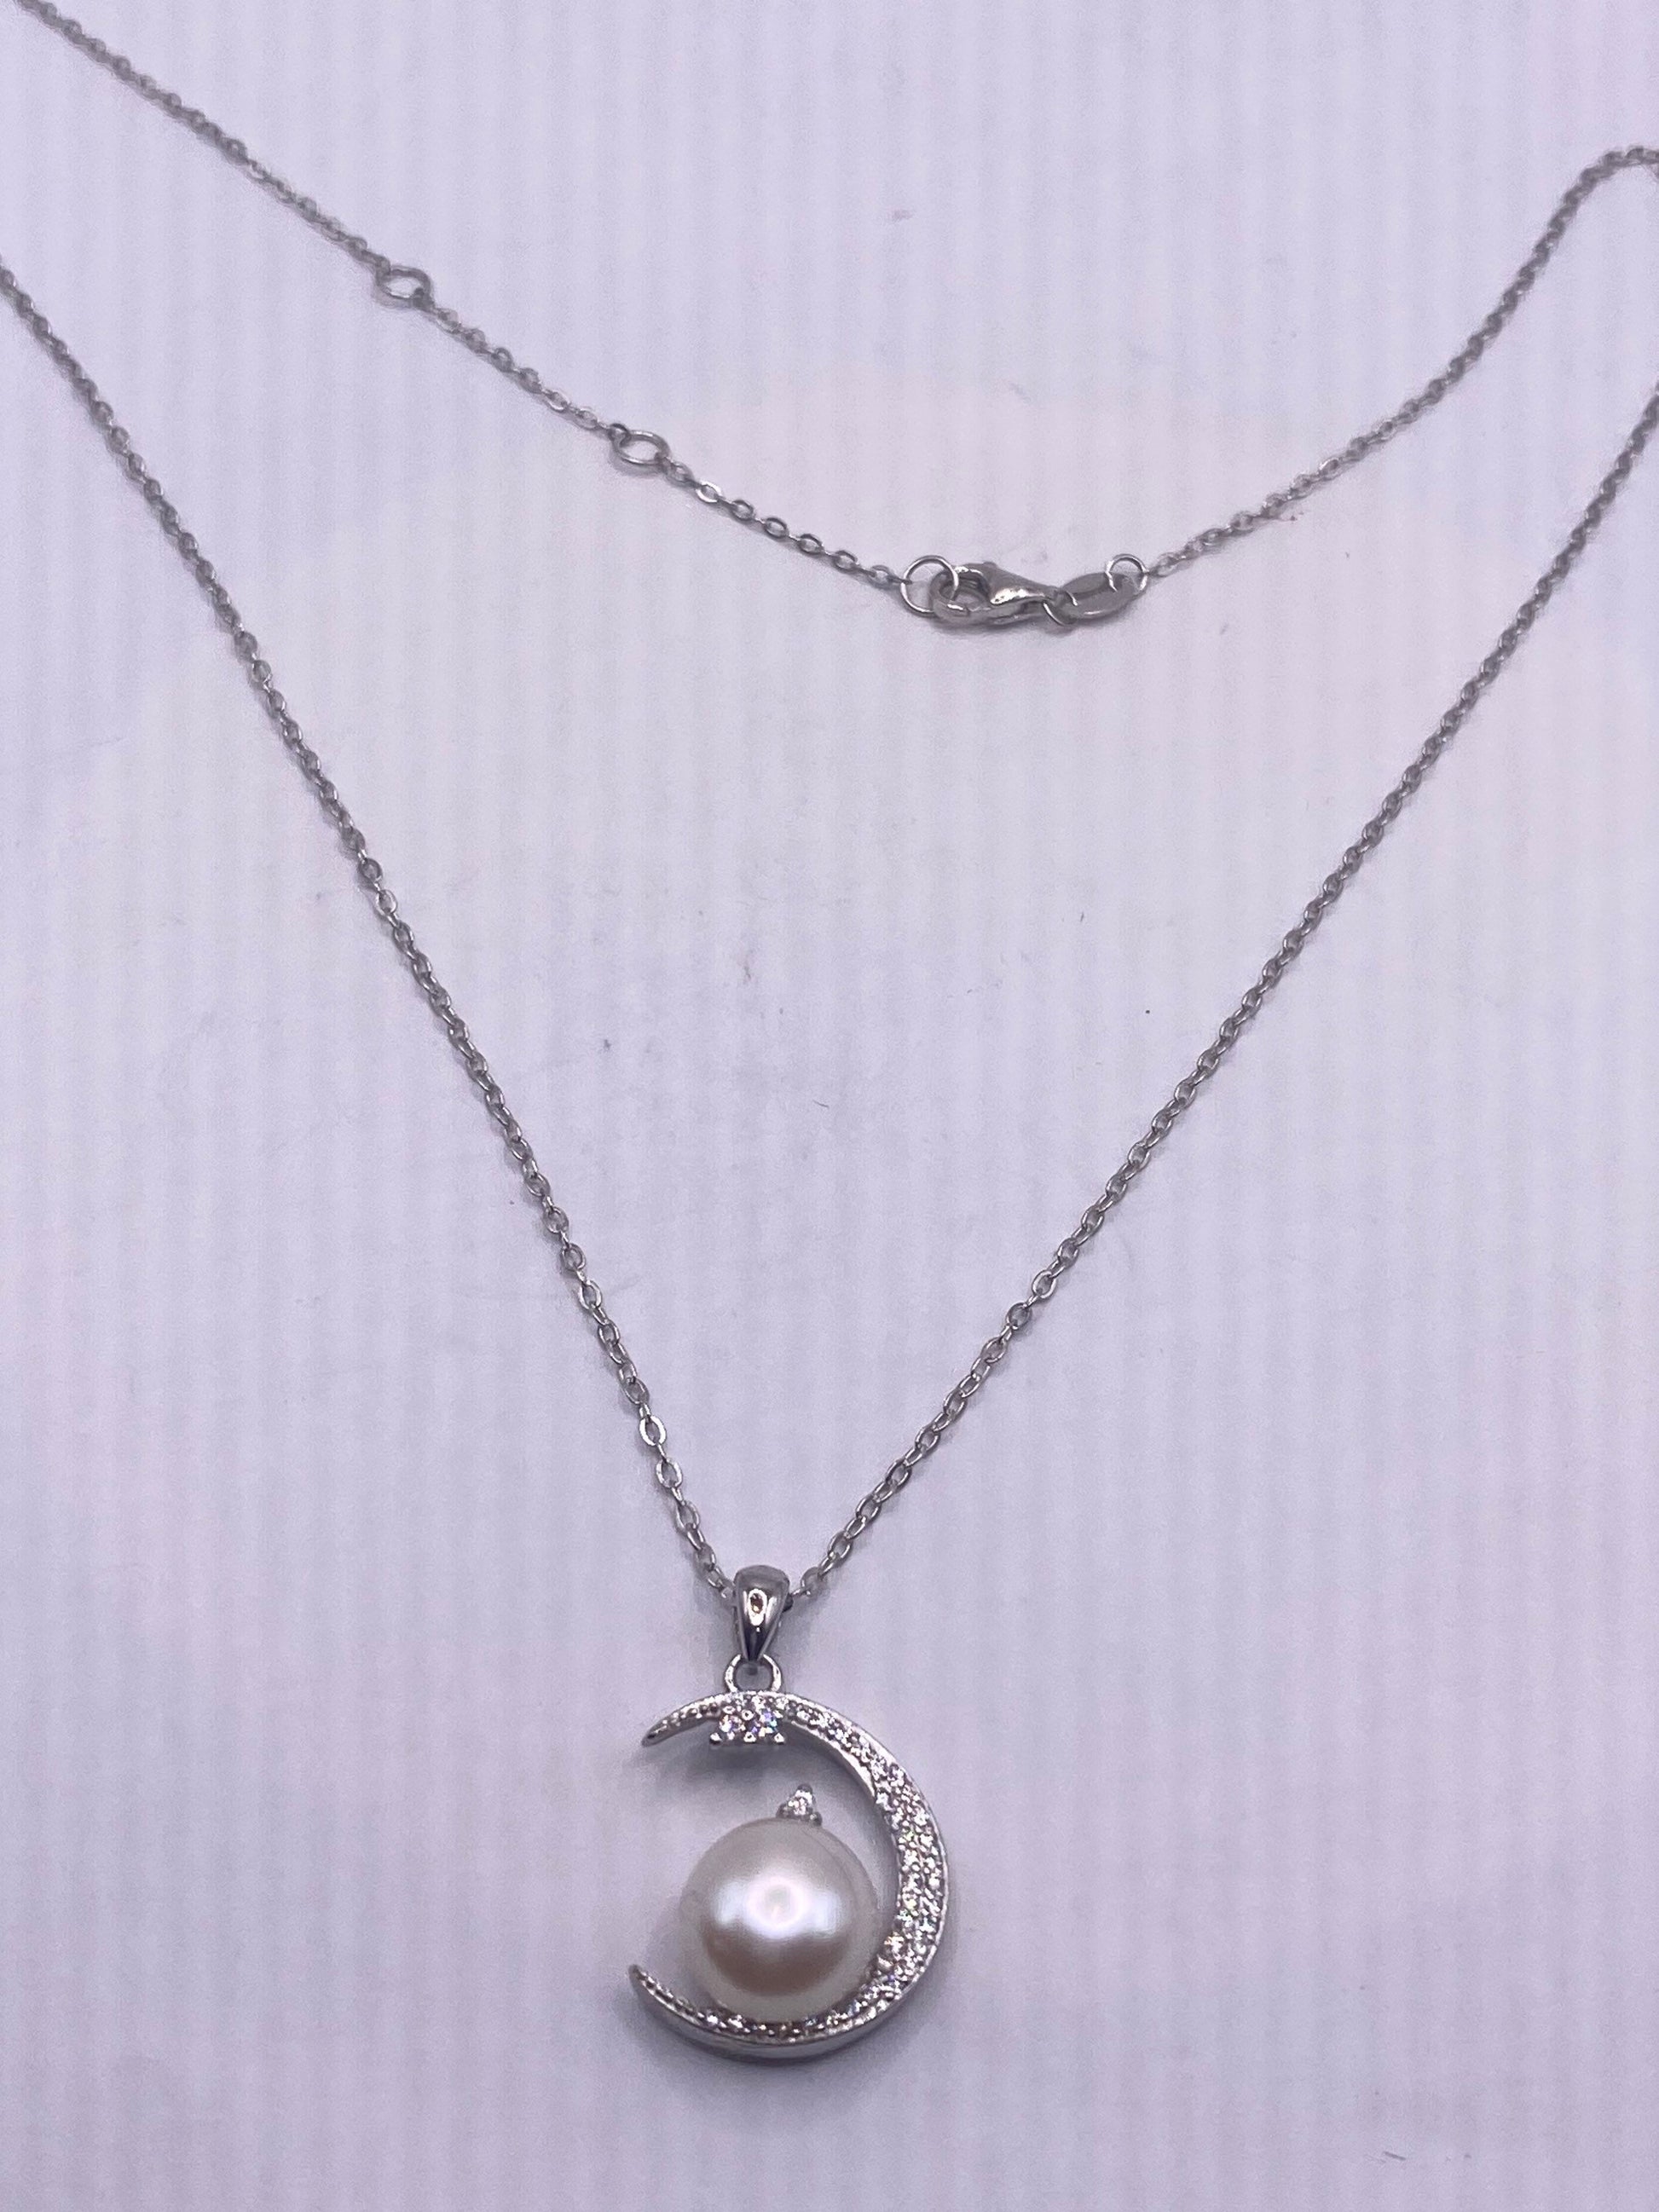 Vintage Crystal Crescent Moon Genuine White Pearl 925 Sterling Silver Choker Pendant Necklace